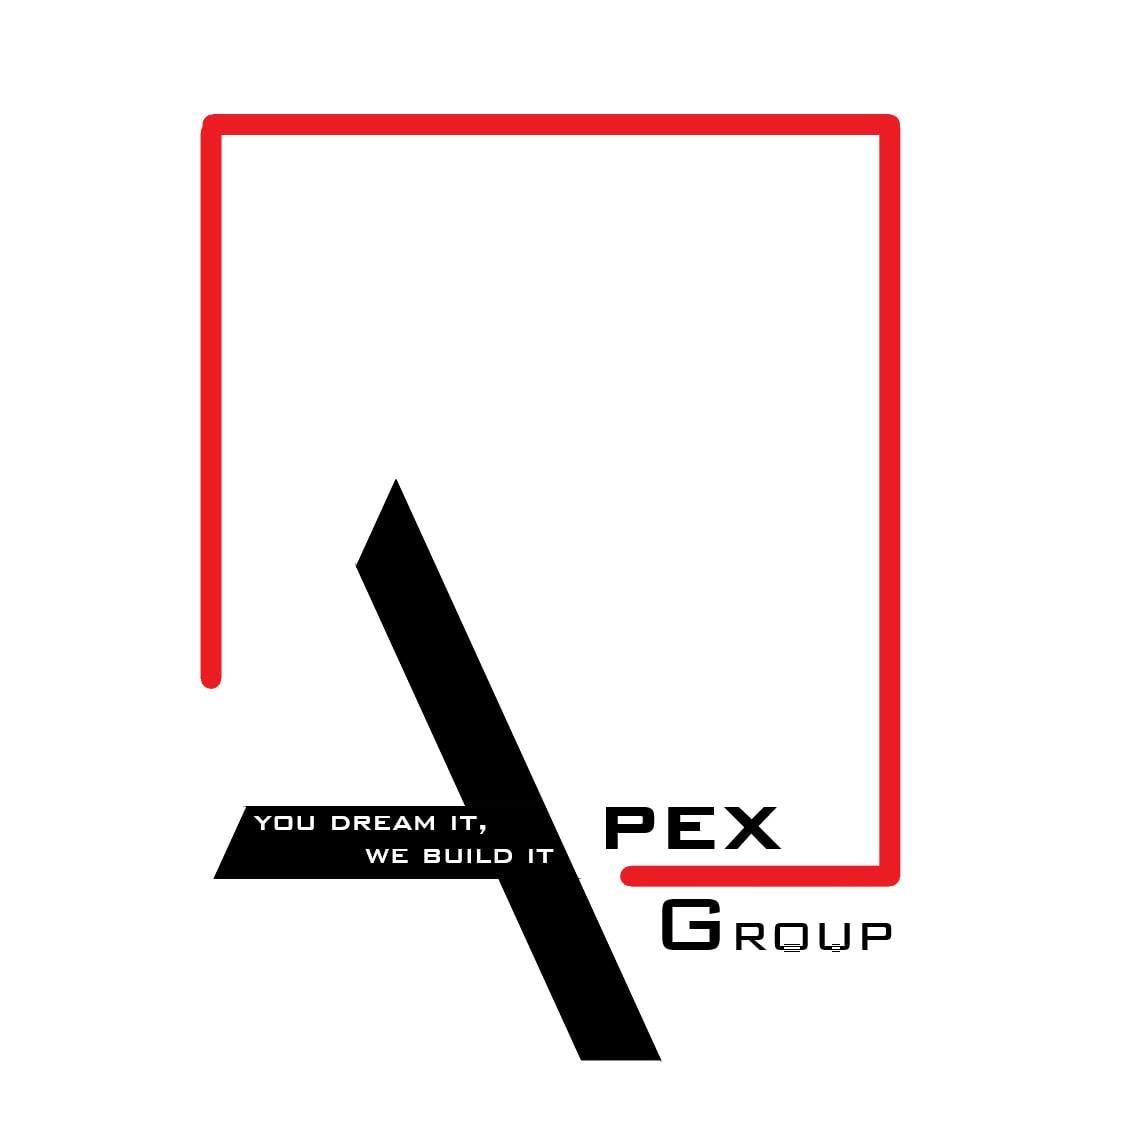 Apex Group|Accounting Services|Professional Services